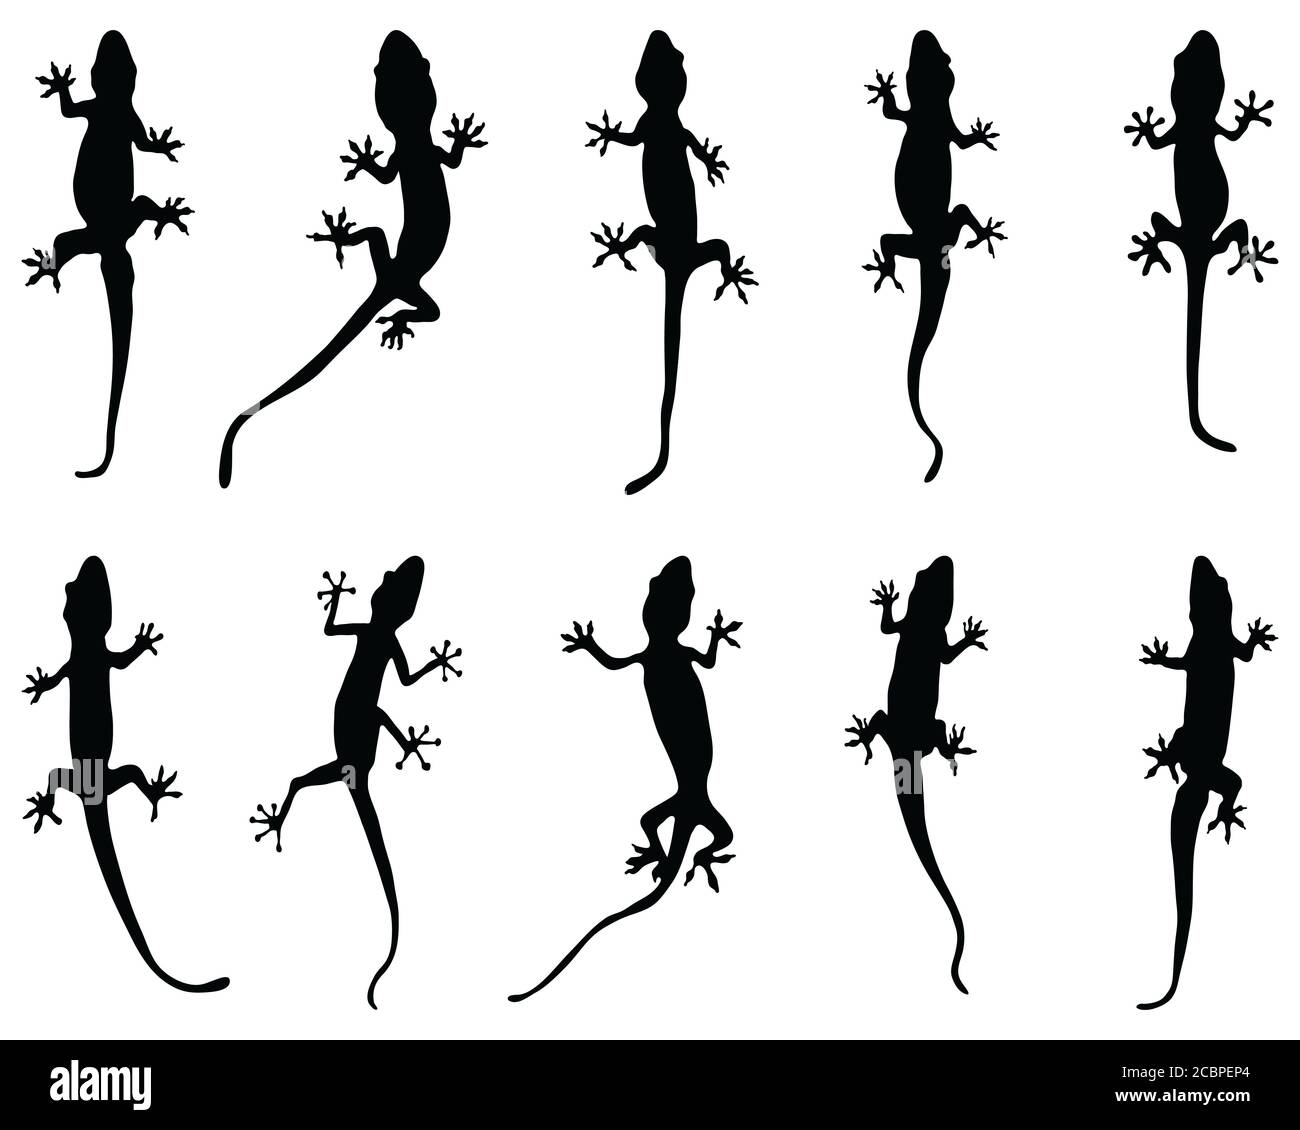 Black silhouettes of lizards on a white background Stock Photo